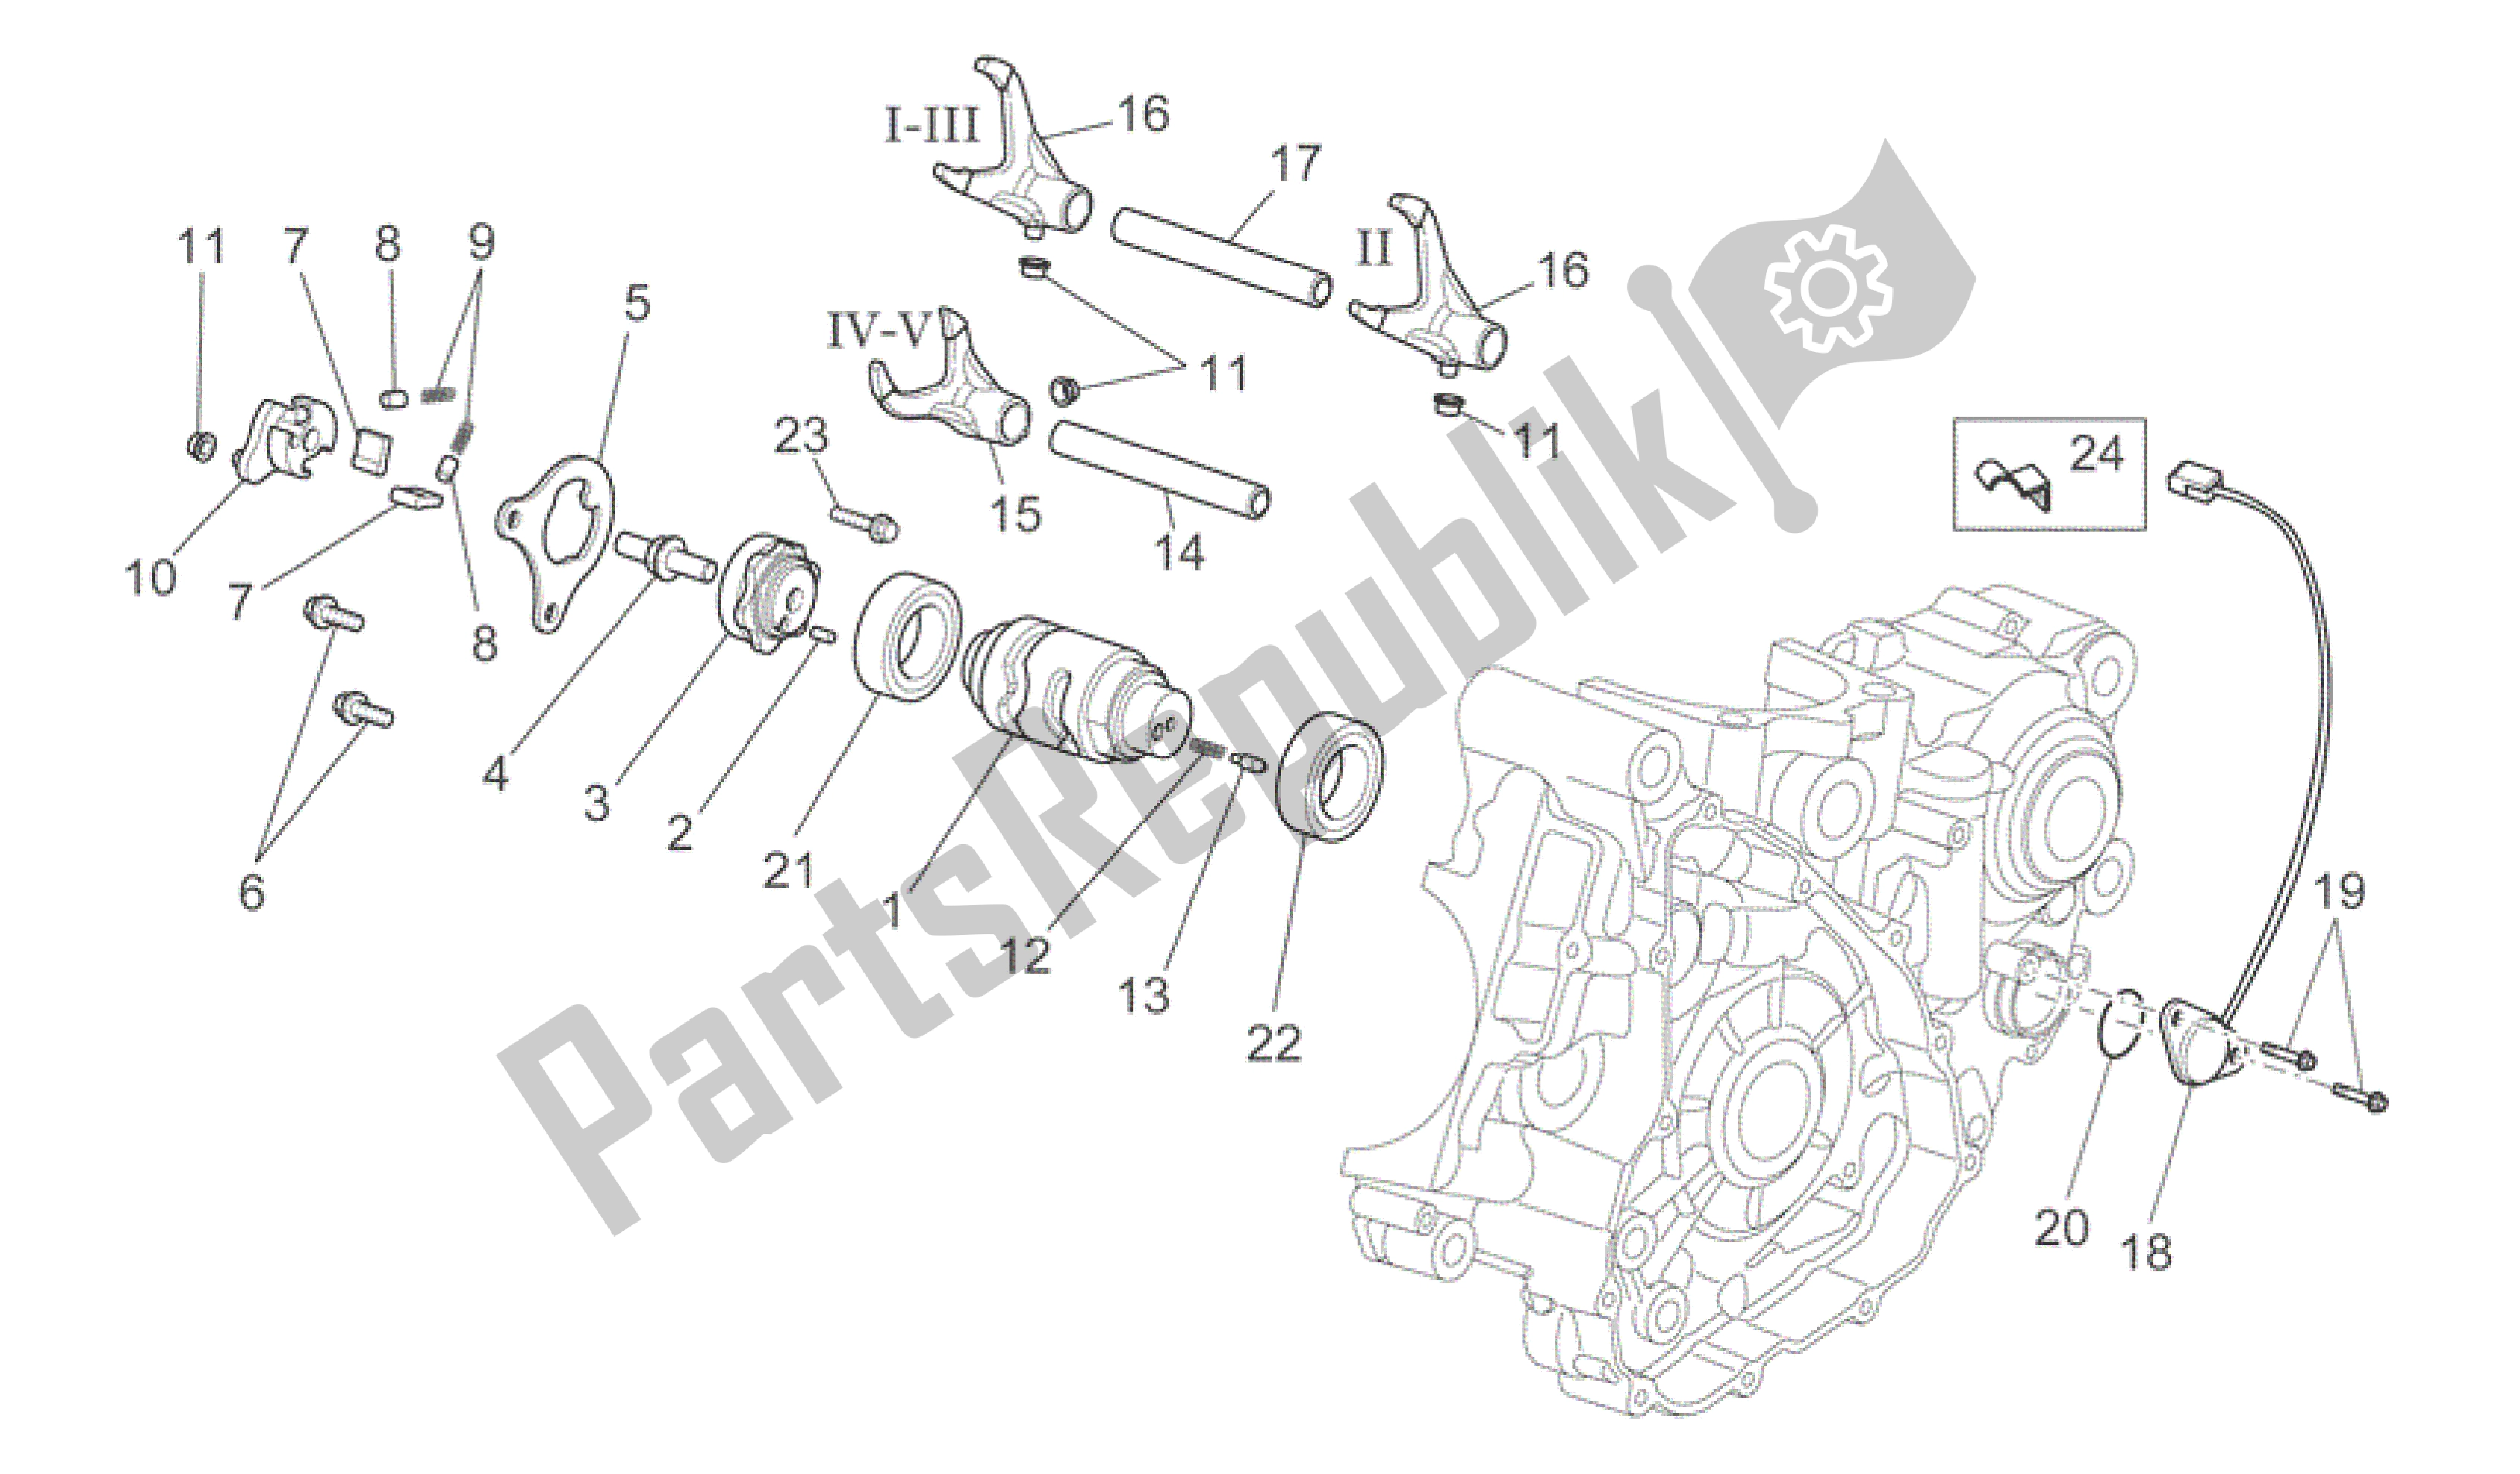 All parts for the Gear Box Selector Ii of the Aprilia SXV 450 2009 - 2011